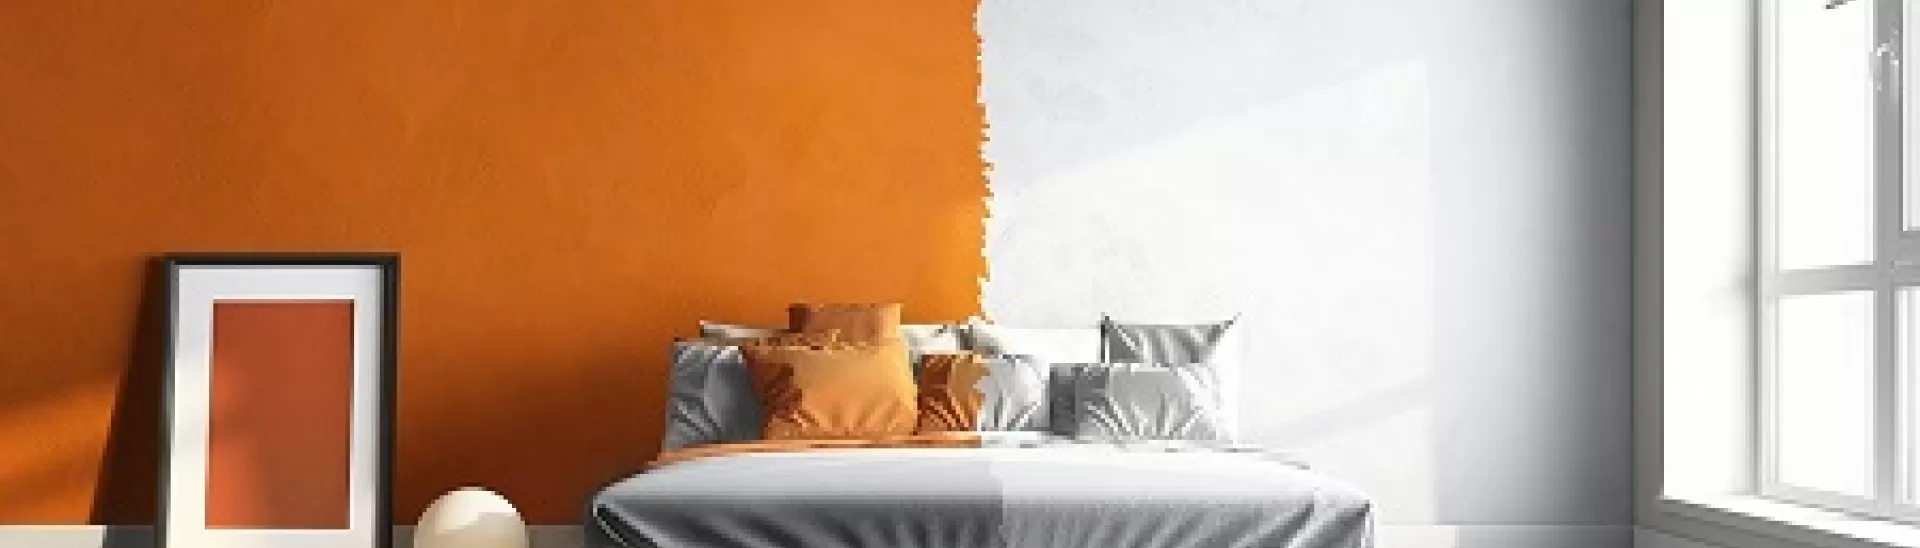 How to Paint a Bedroom?